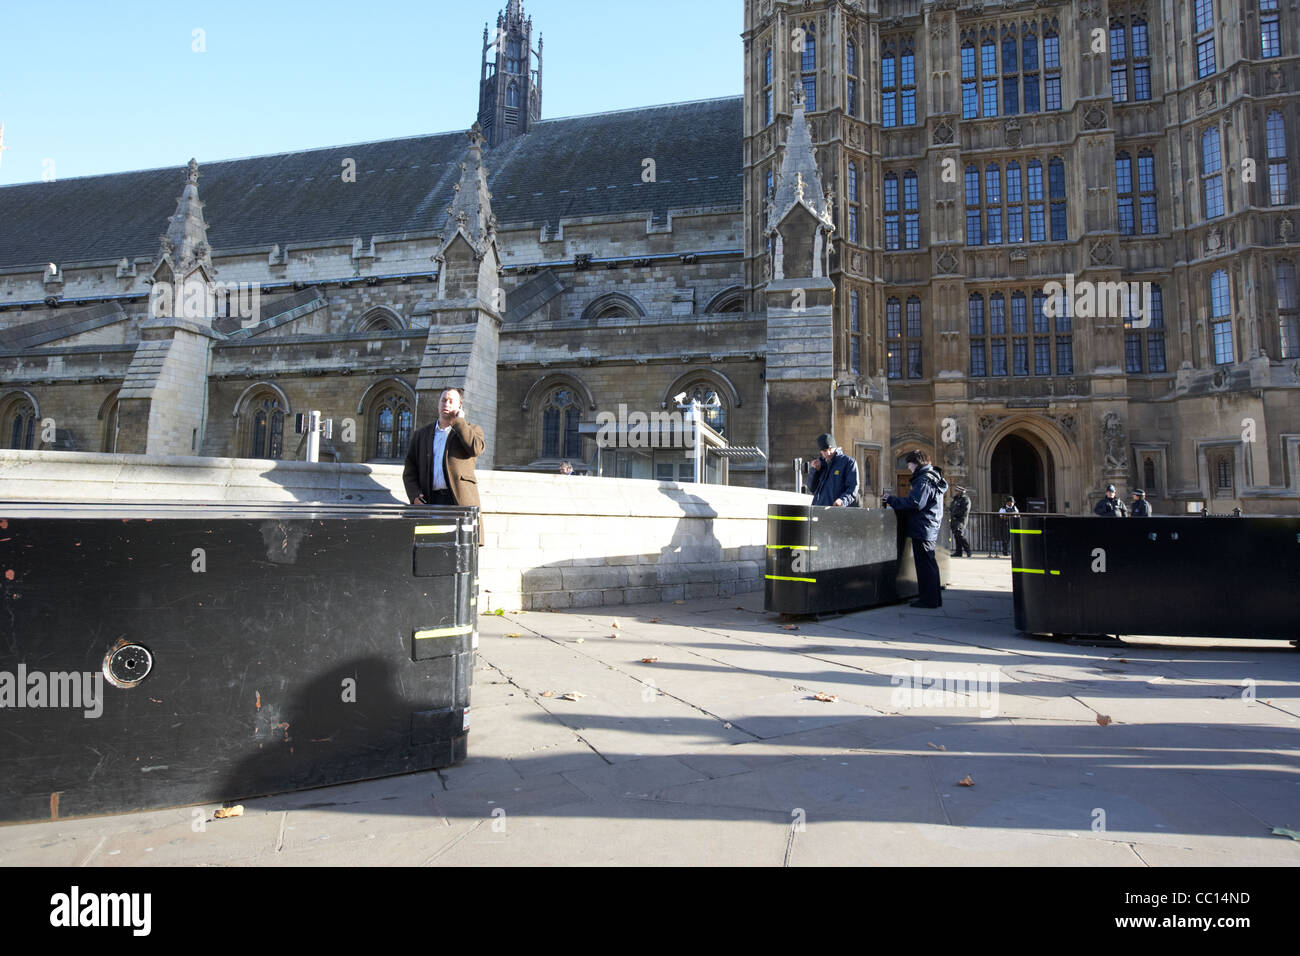 security barriers in place at the public entrance to the palace of westminster houses of parliament buildings London England UK Stock Photo